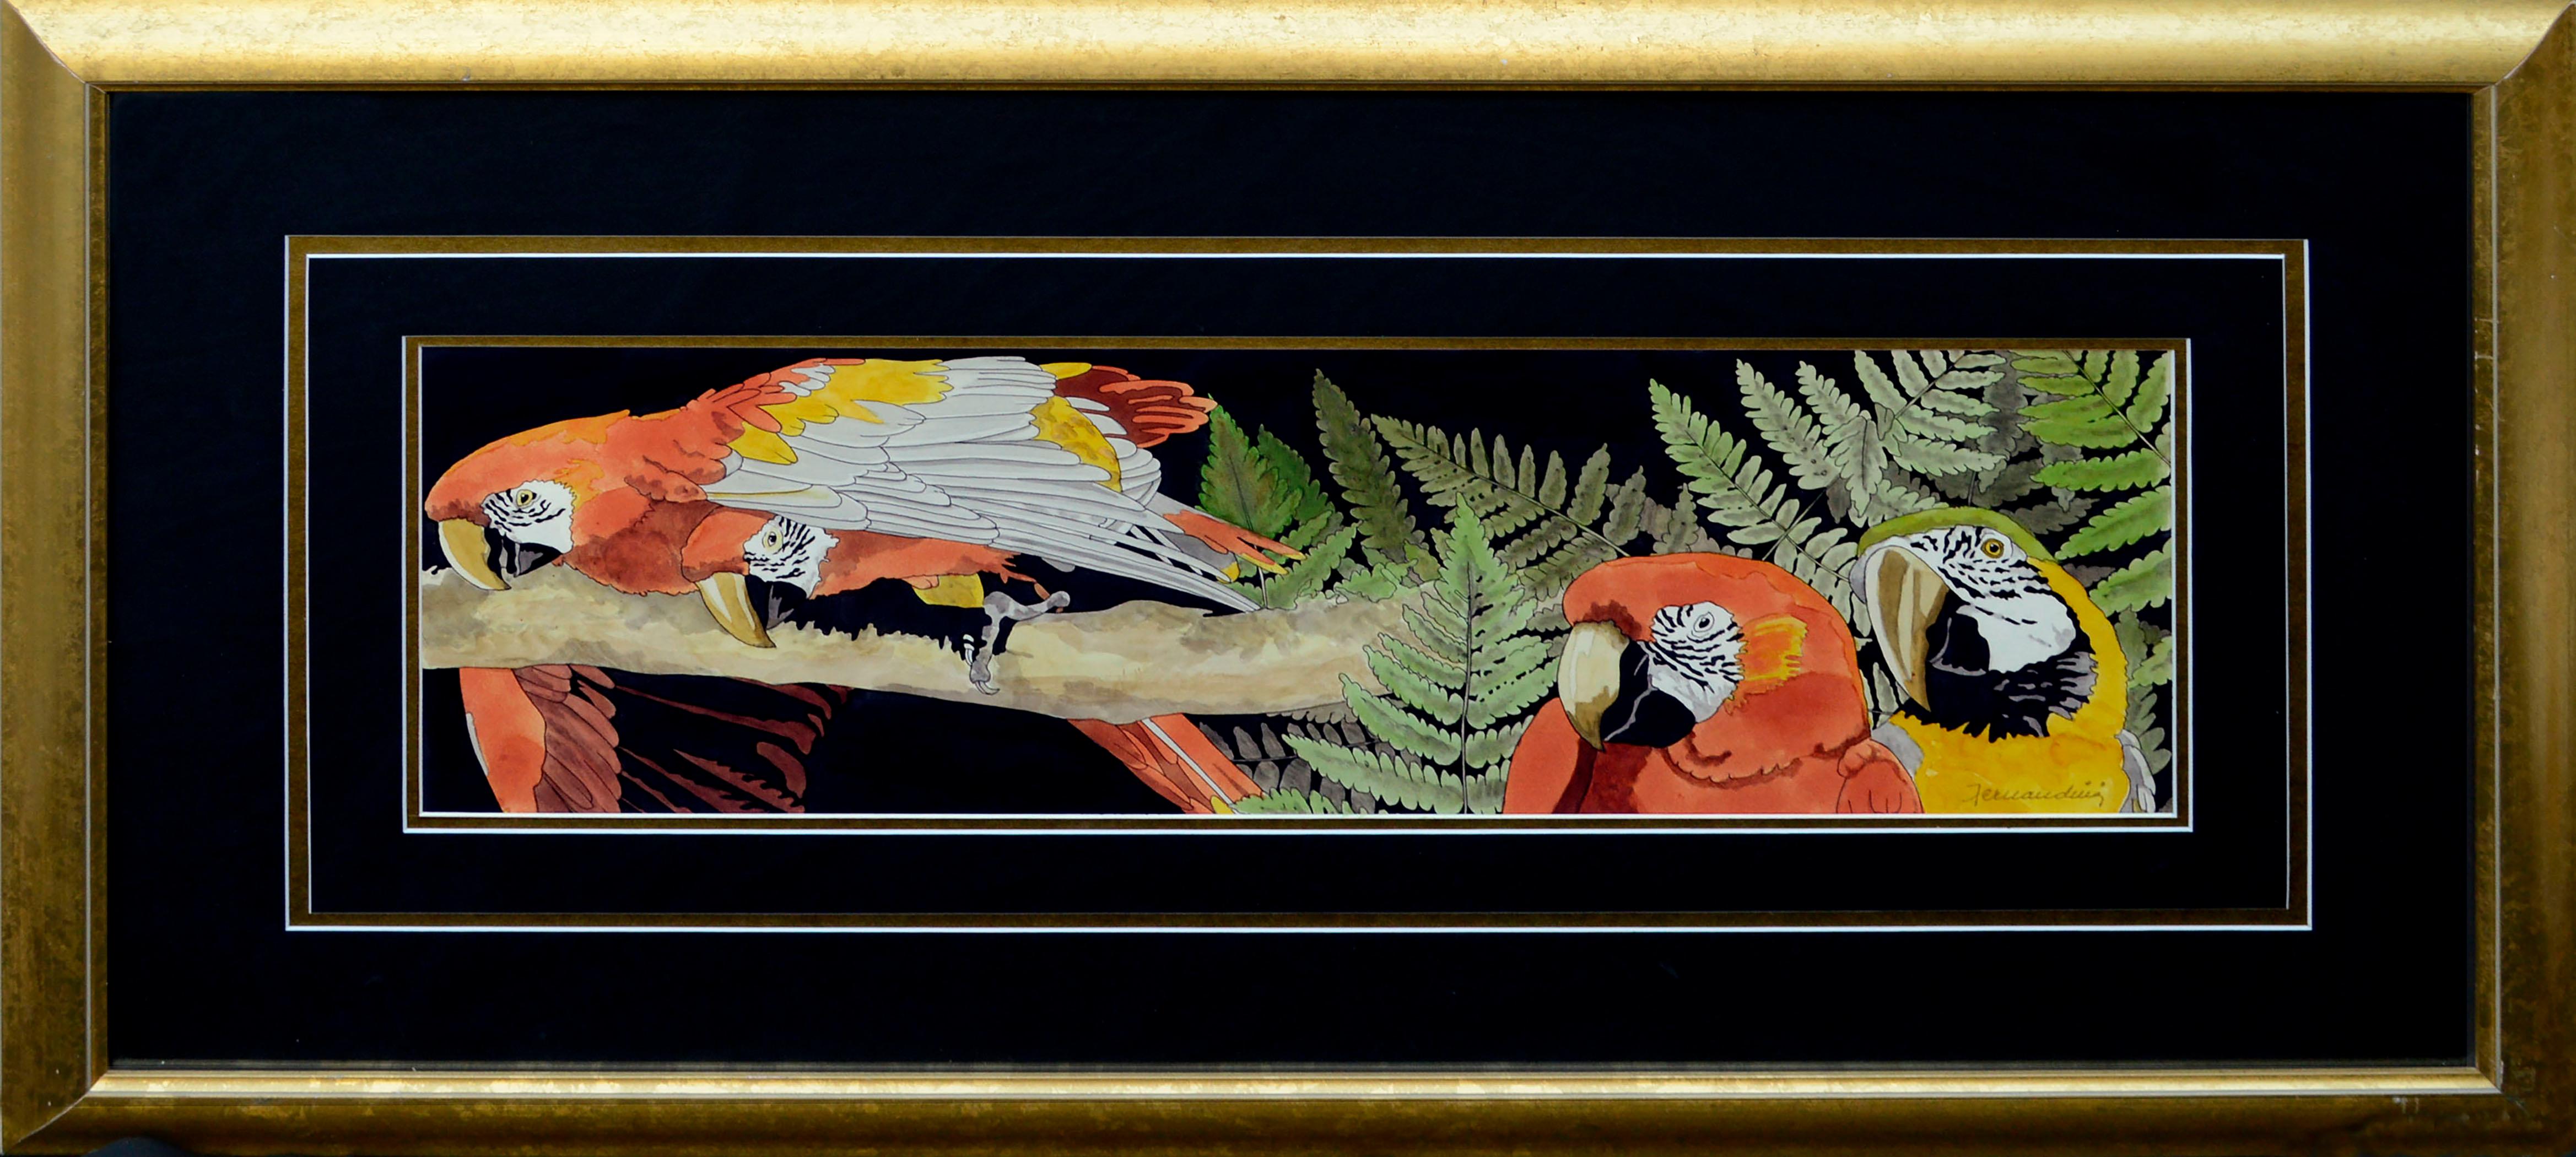 Unknown Animal Art - Scarlett Macaw Parrots and Ferns Watercolor, Large-Scale Horizontal Panorama 